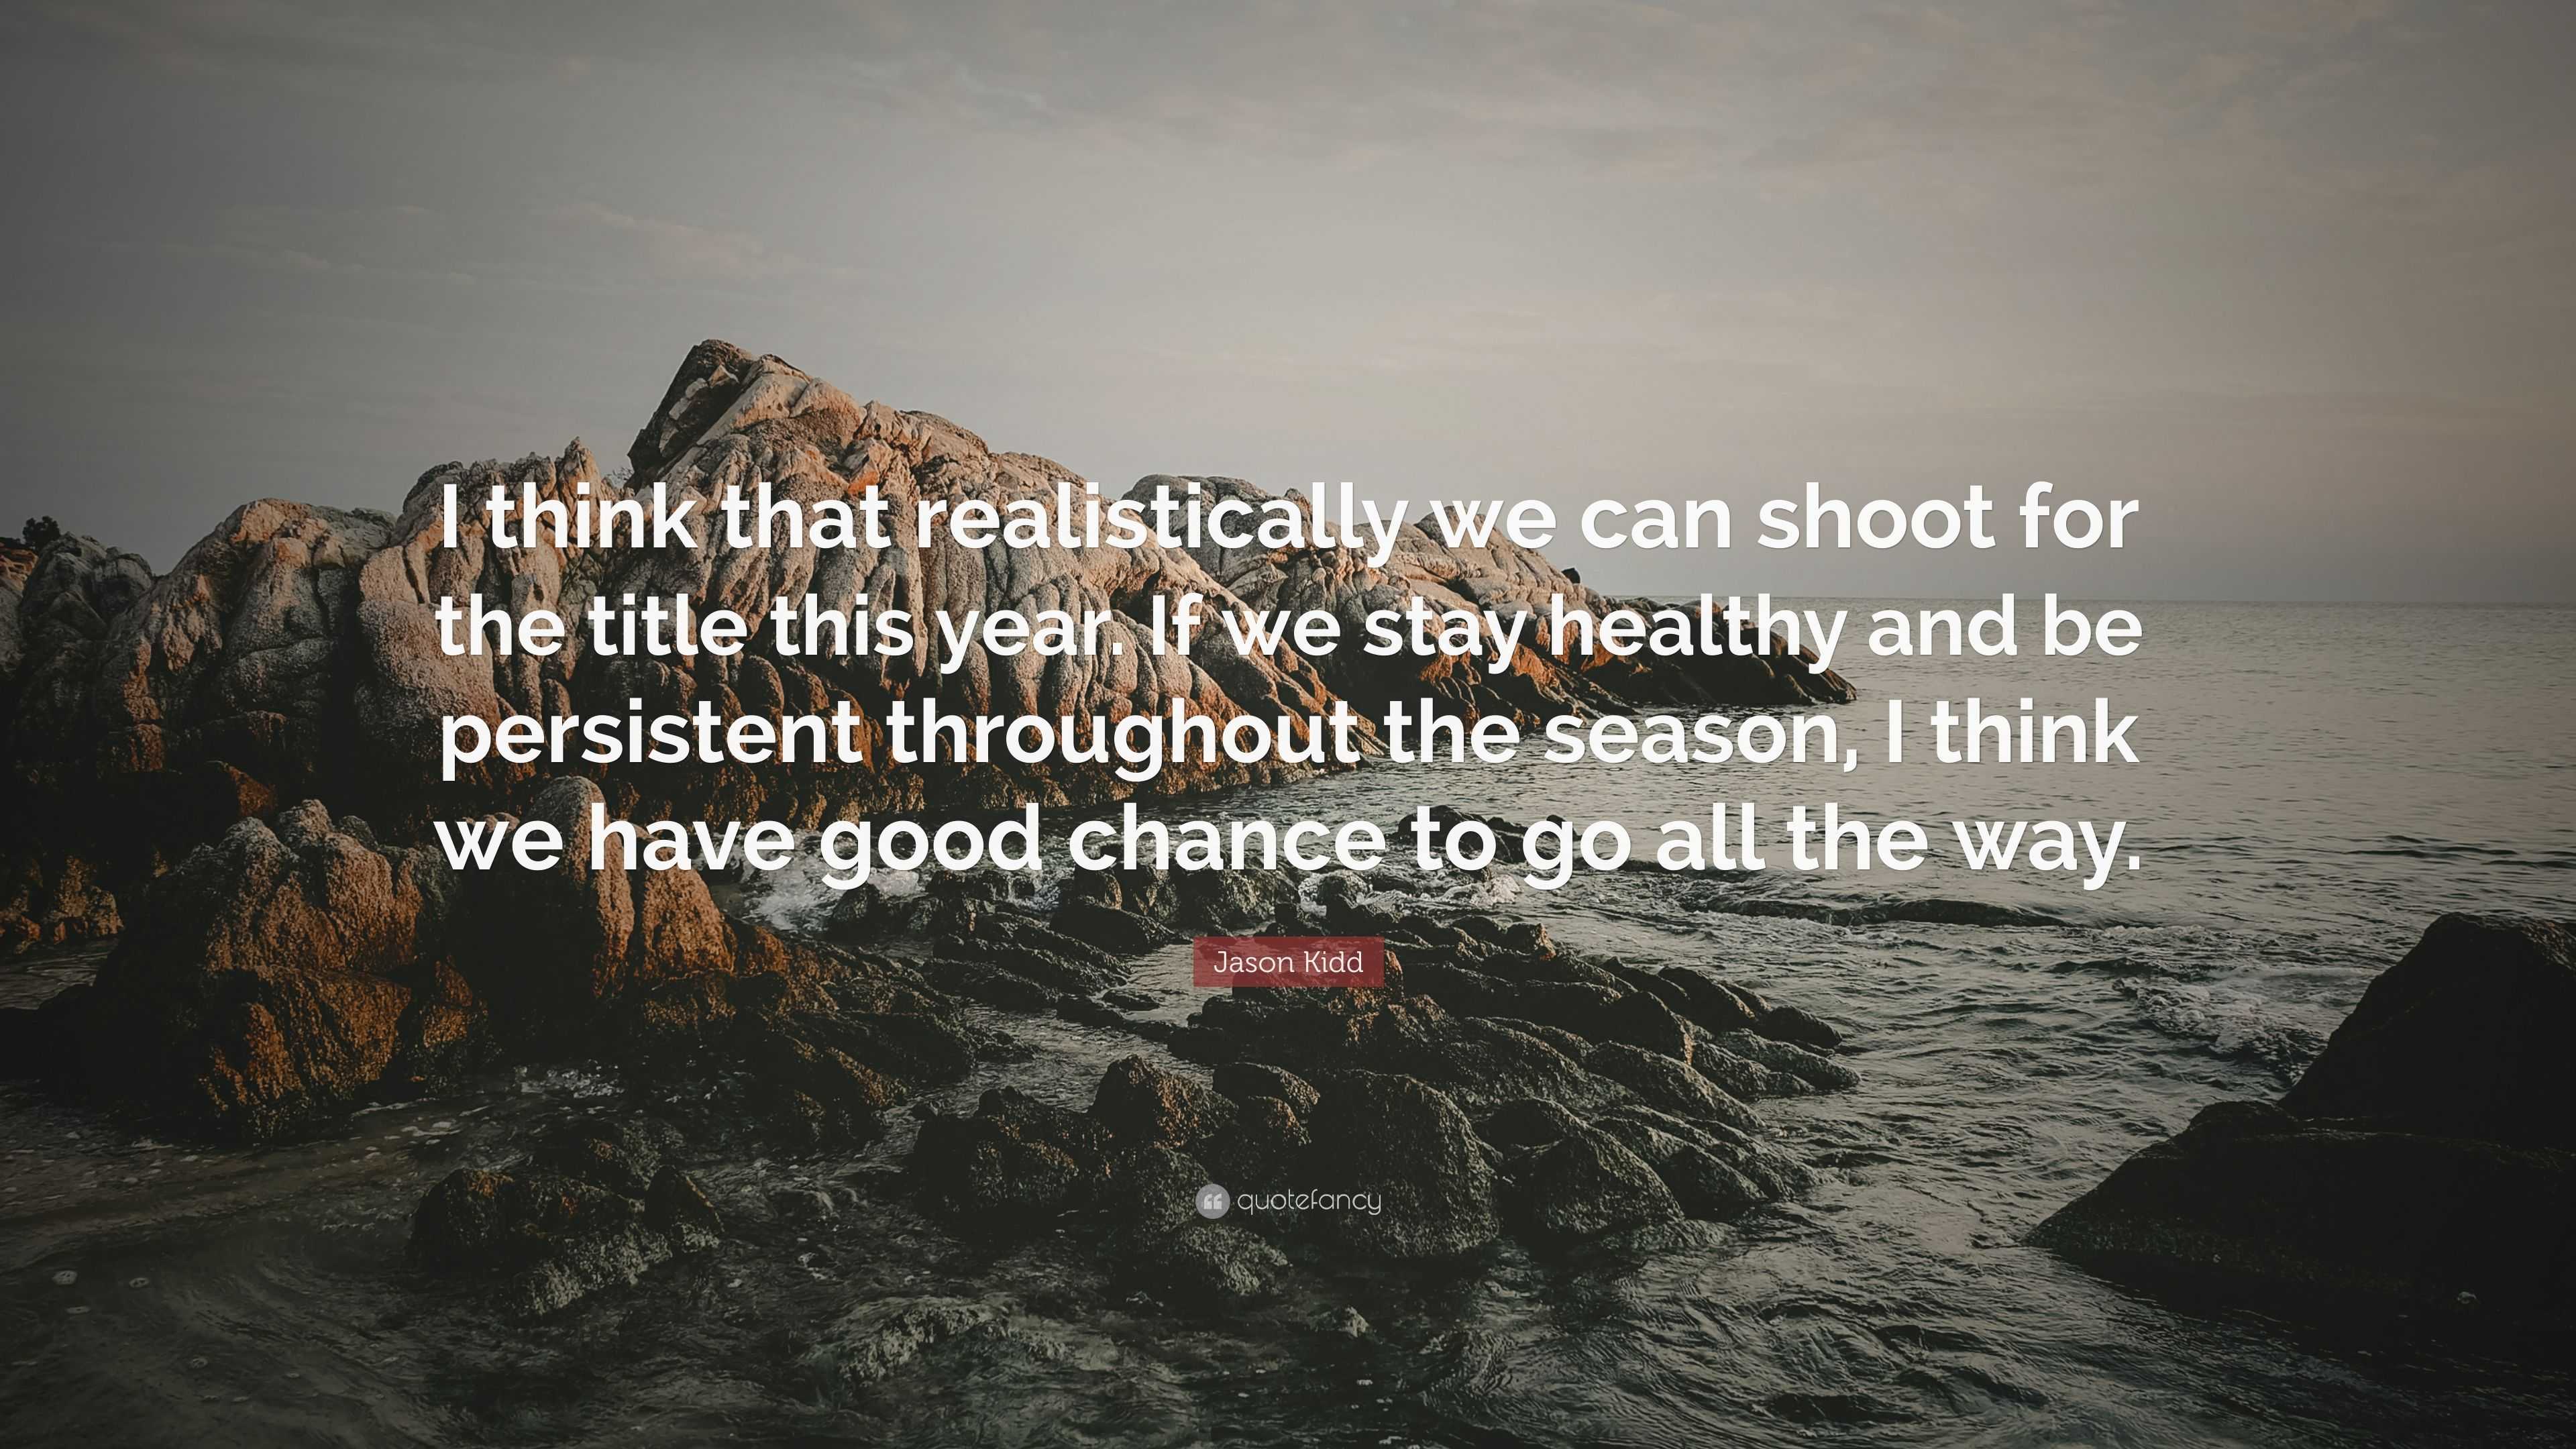 https://quotefancy.com/media/wallpaper/3840x2160/2718860-Jason-Kidd-Quote-I-think-that-realistically-we-can-shoot-for-the.jpg